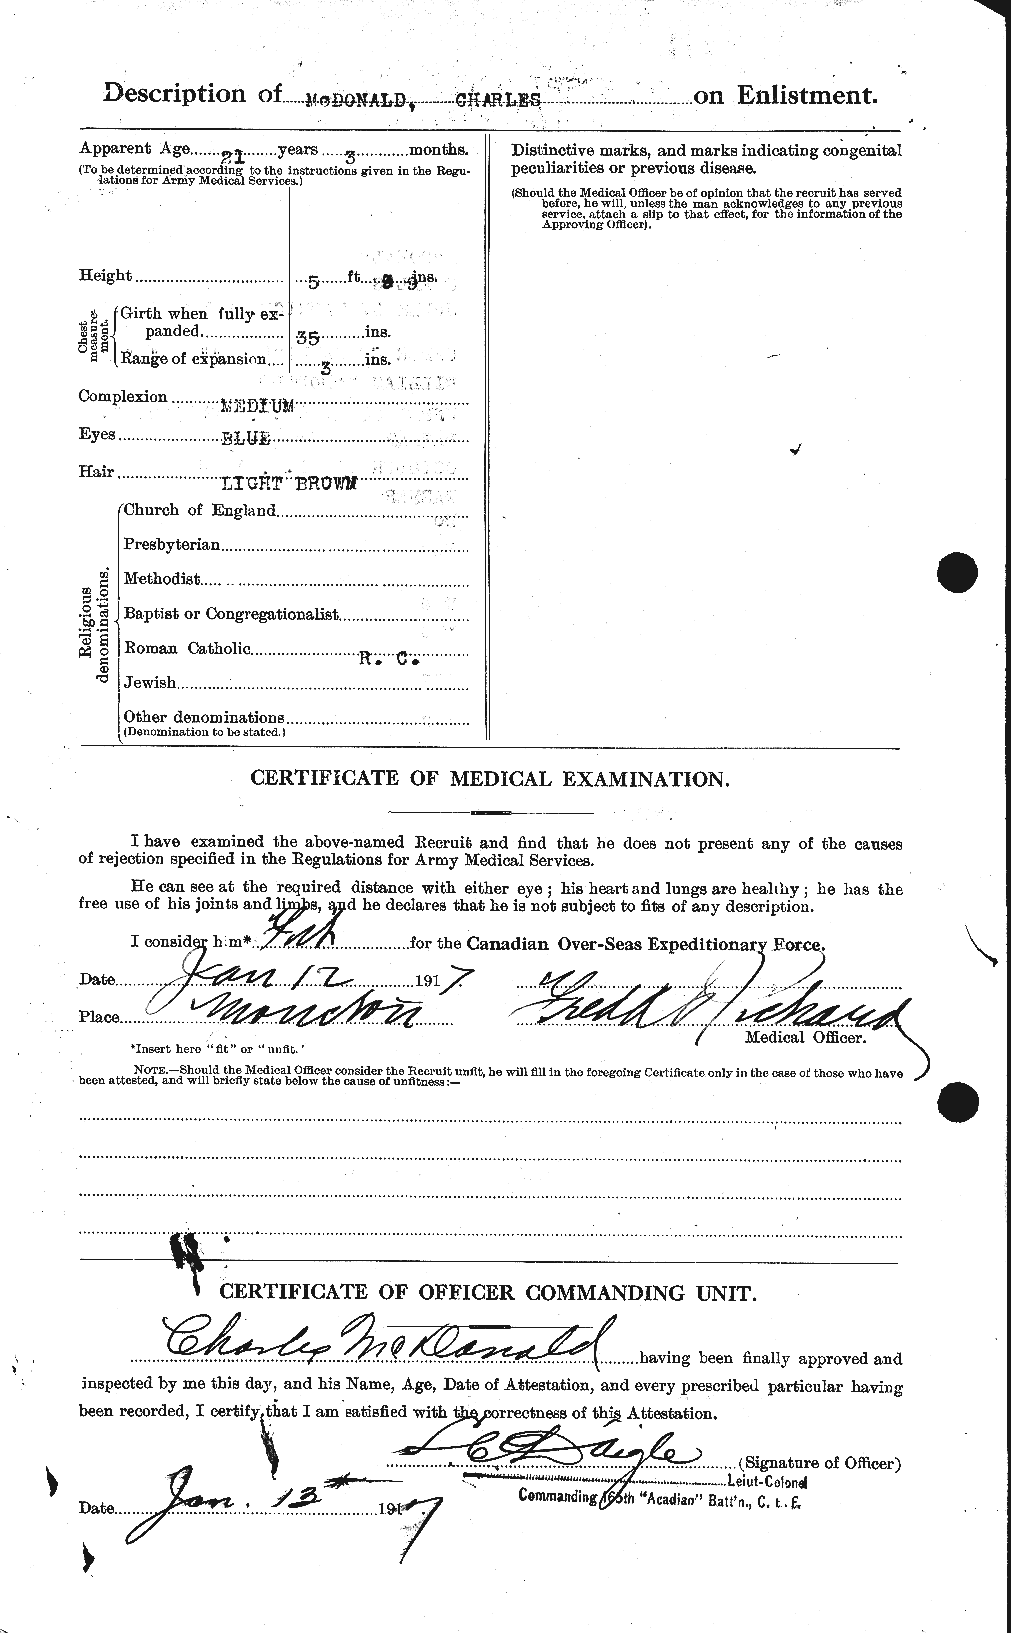 Personnel Records of the First World War - CEF 136448b